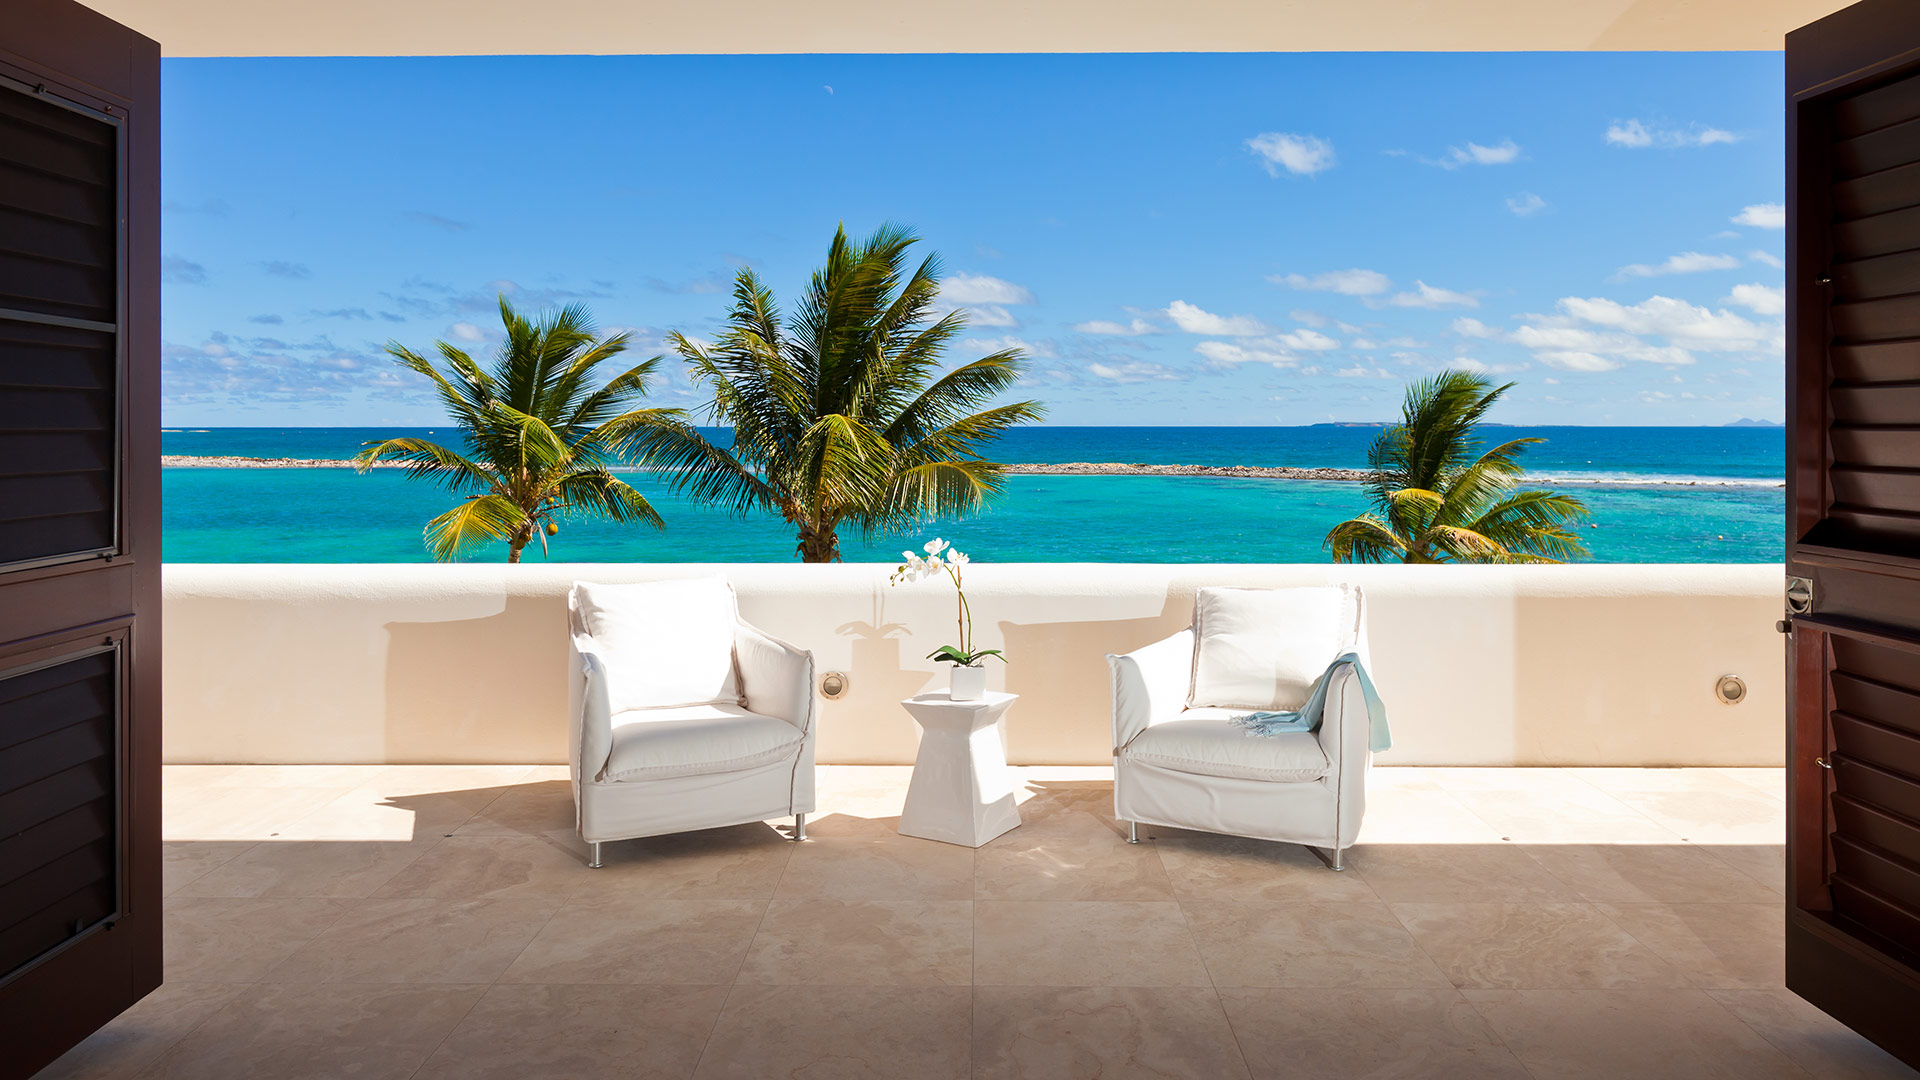 The spectacular blue skies and waters of Anguilla make Le Bleu the perfect rental villa for a dream island vacation.
